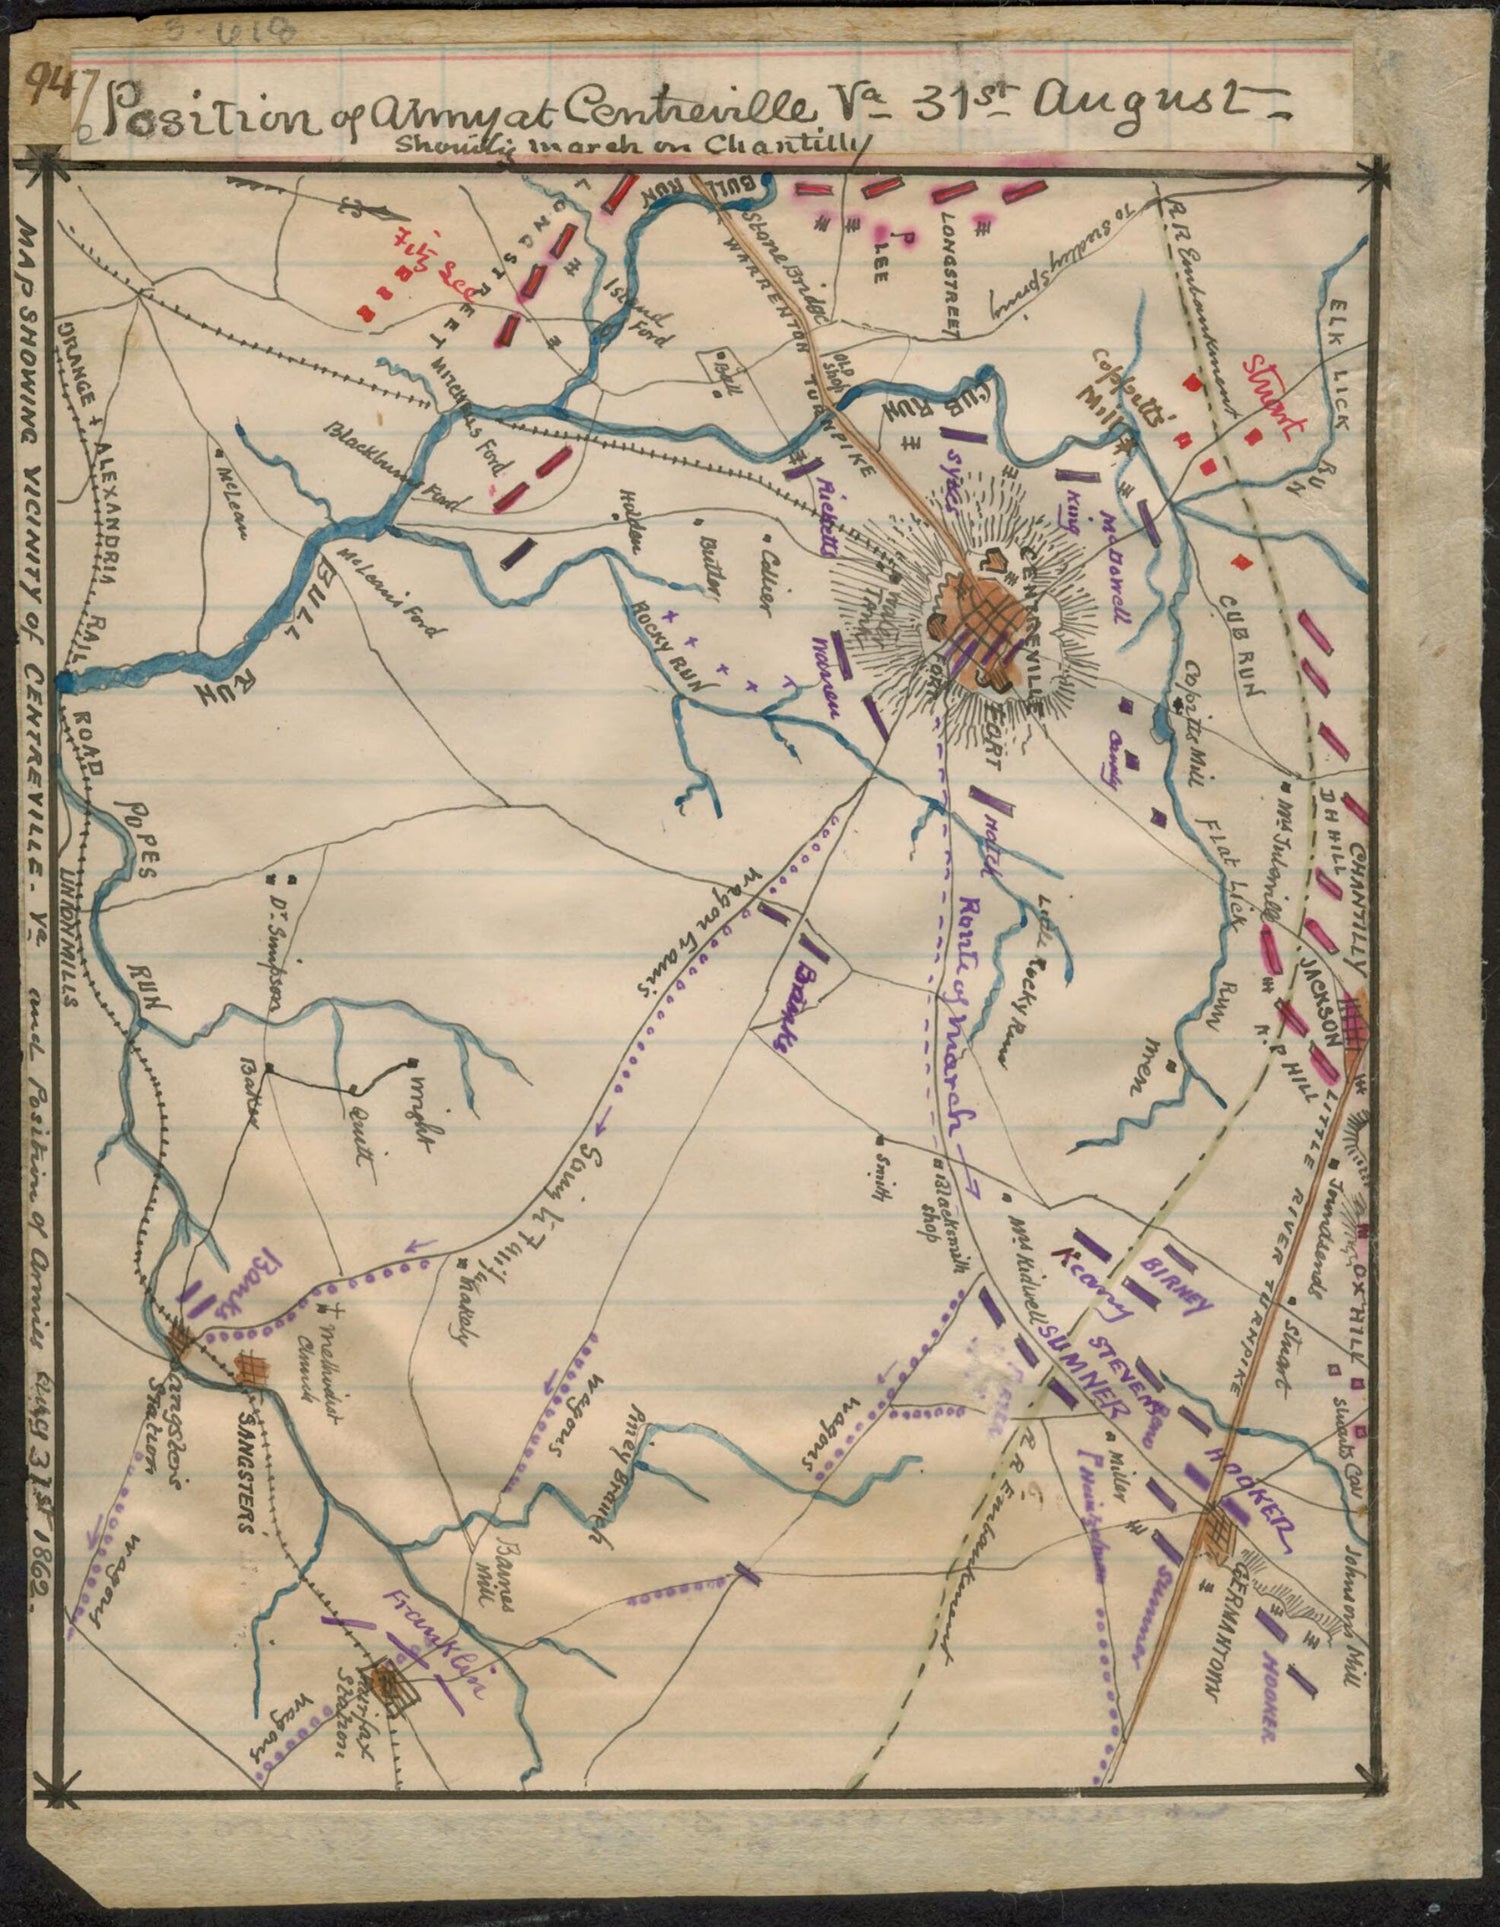 This old map of Position of Army at Centreville Va. 31st August from 08-31 was created by Robert Knox Sneden in 08-31